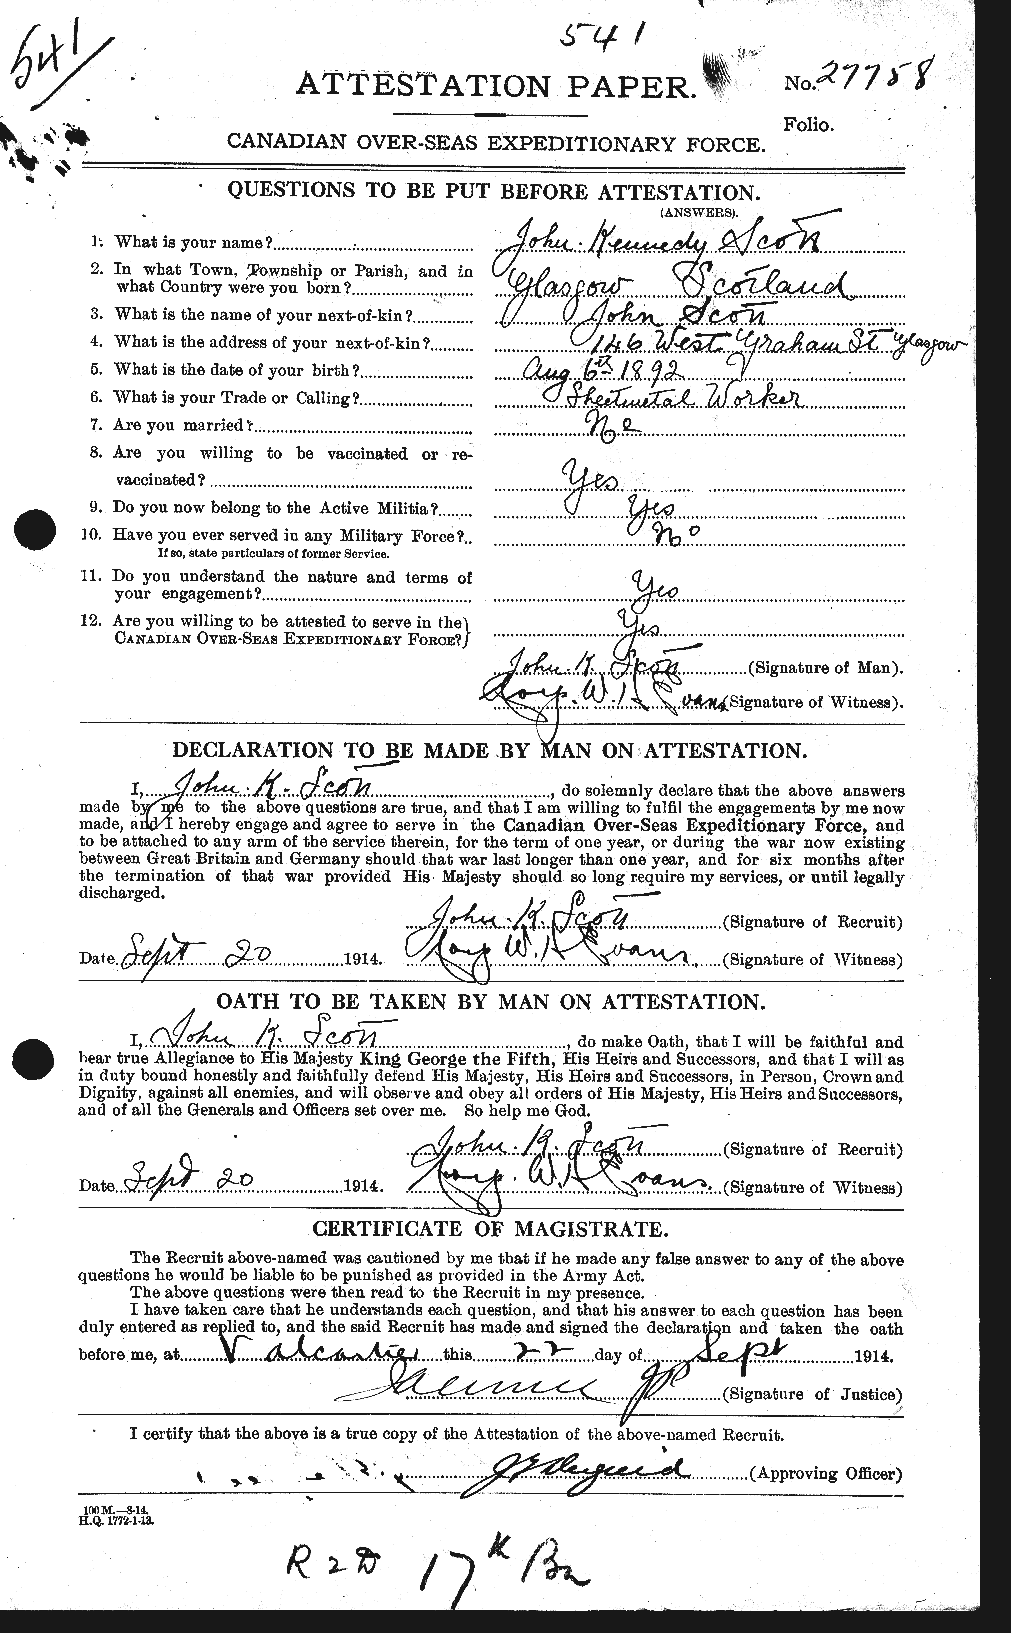 Personnel Records of the First World War - CEF 084448a